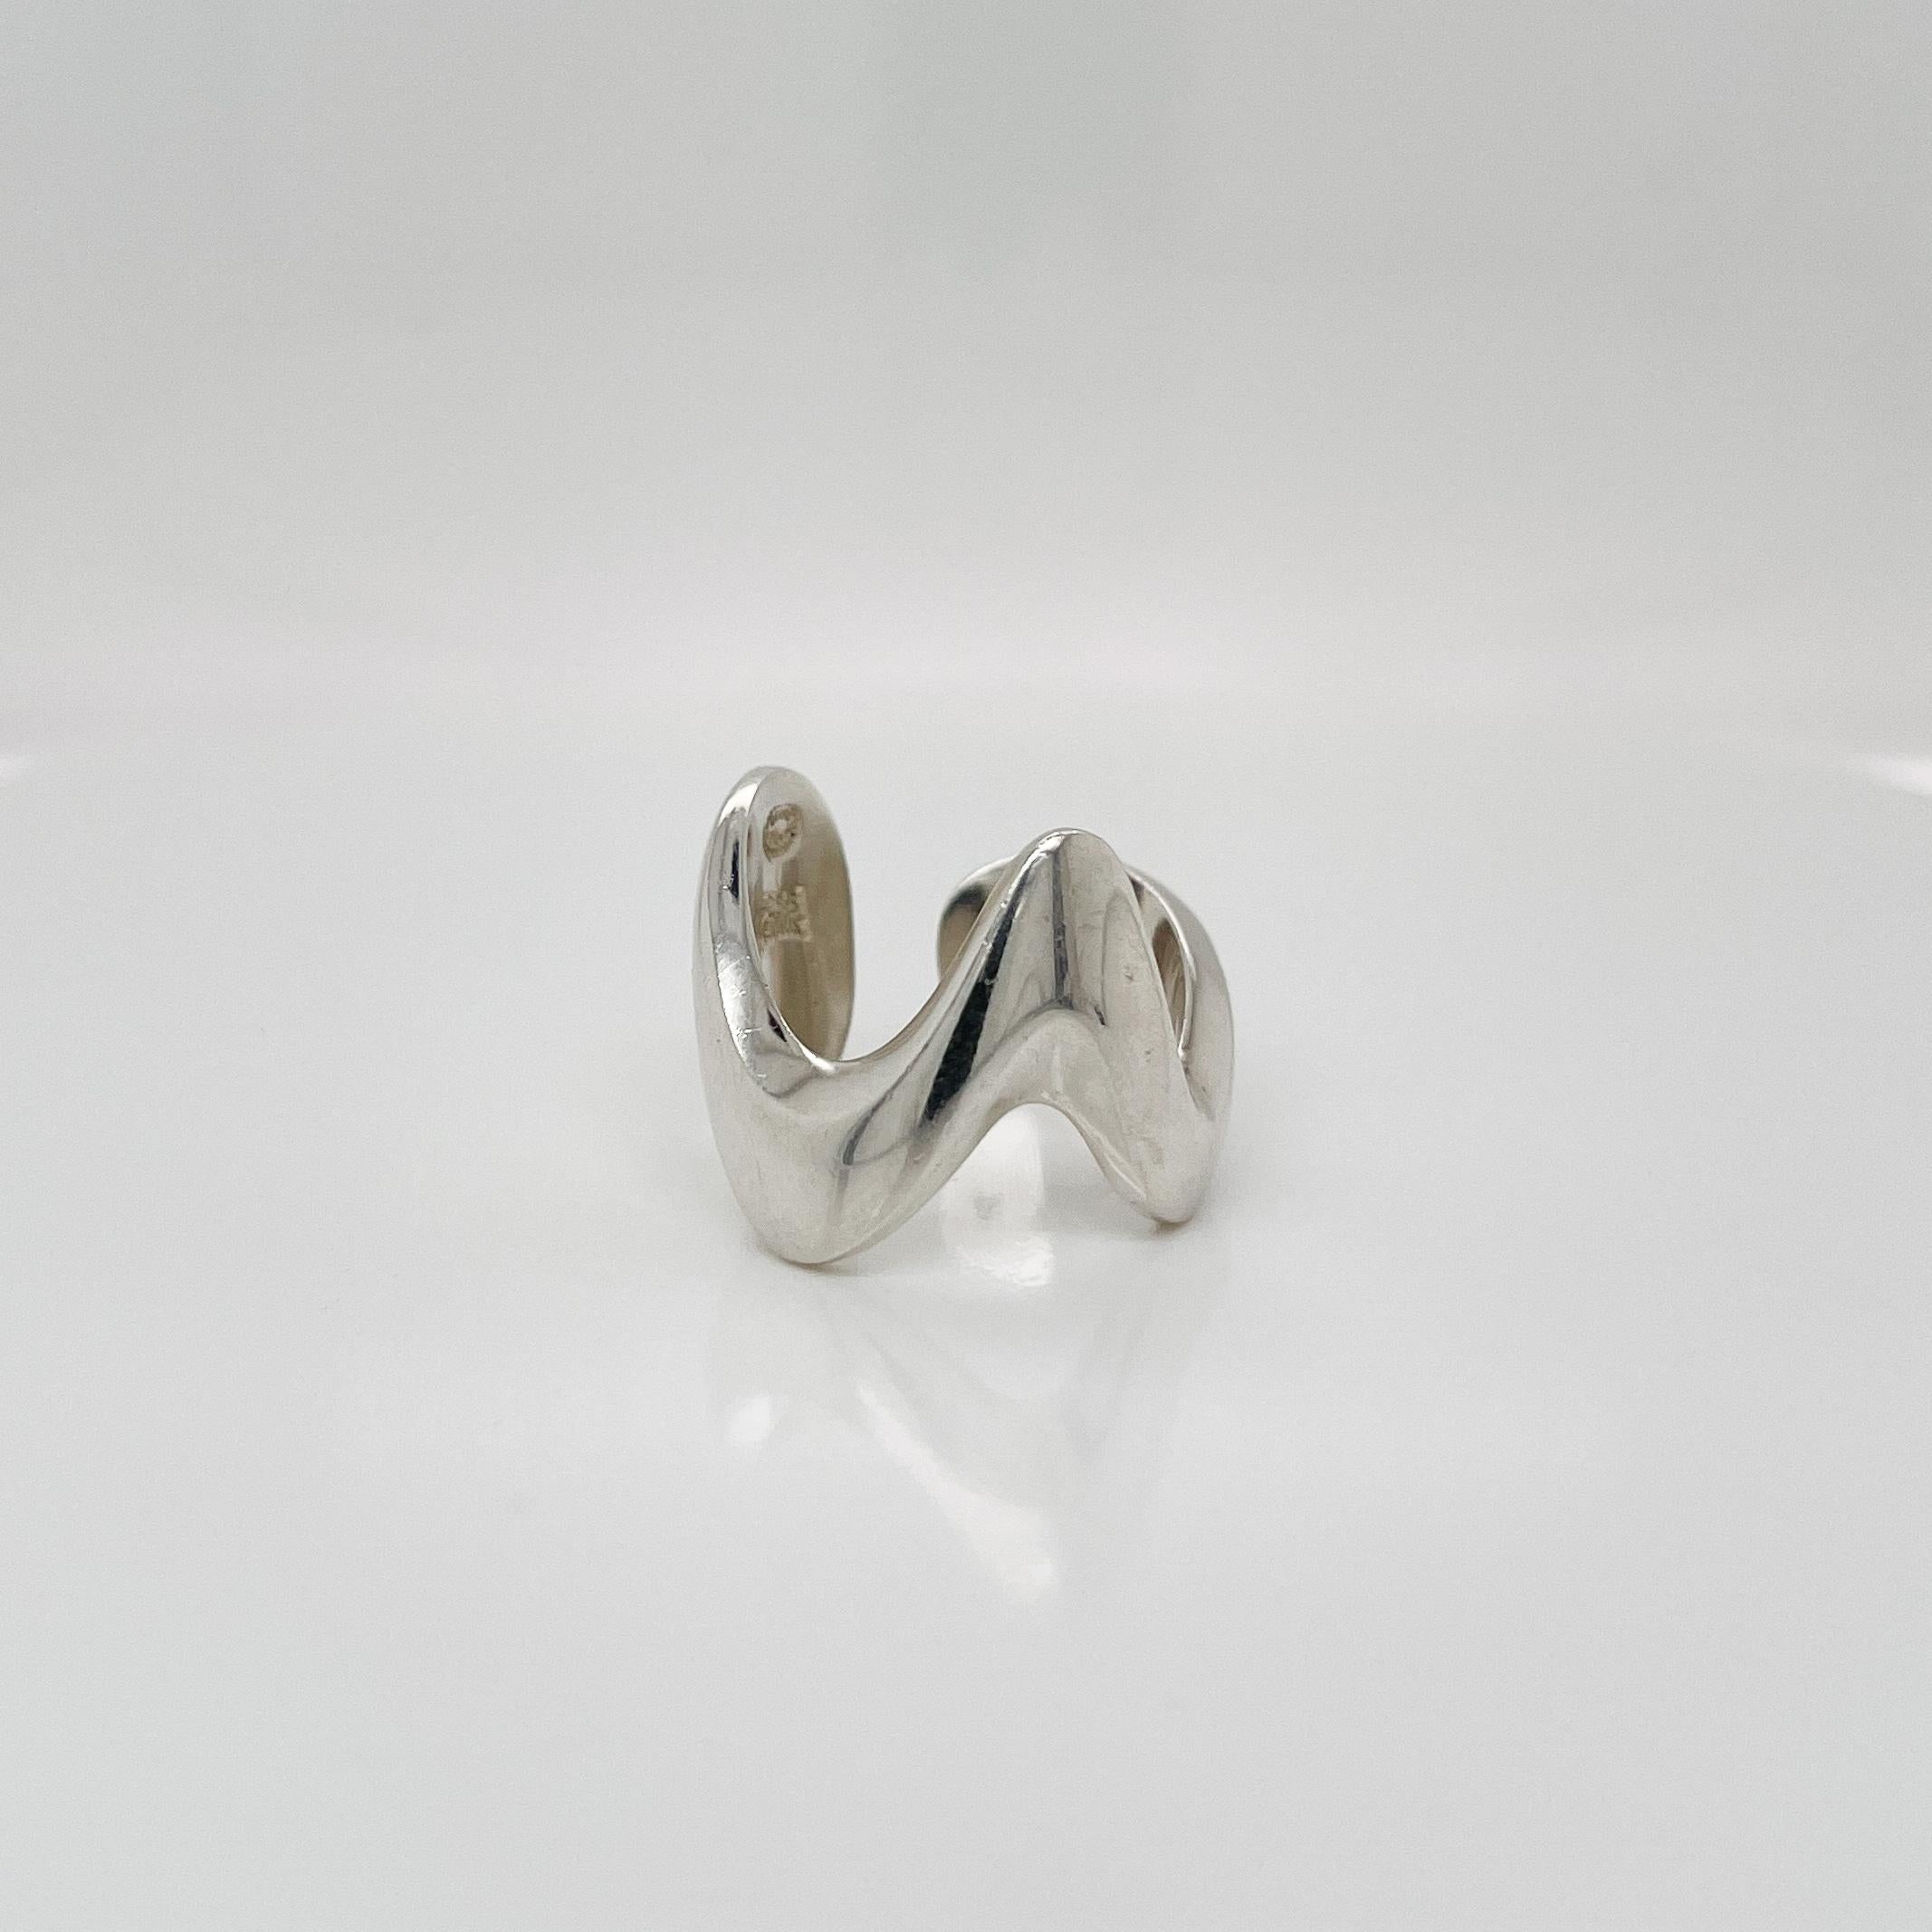 A fine Georg Jensen ring.

In sterling silver. 

Model No. A 77C. 

Designed by Ole Ishøj 

Simply a great Jensen ring!

Date:
20th Century

Overall Condition:
It is in overall good, as-pictured, used estate condition with some fine & light surface